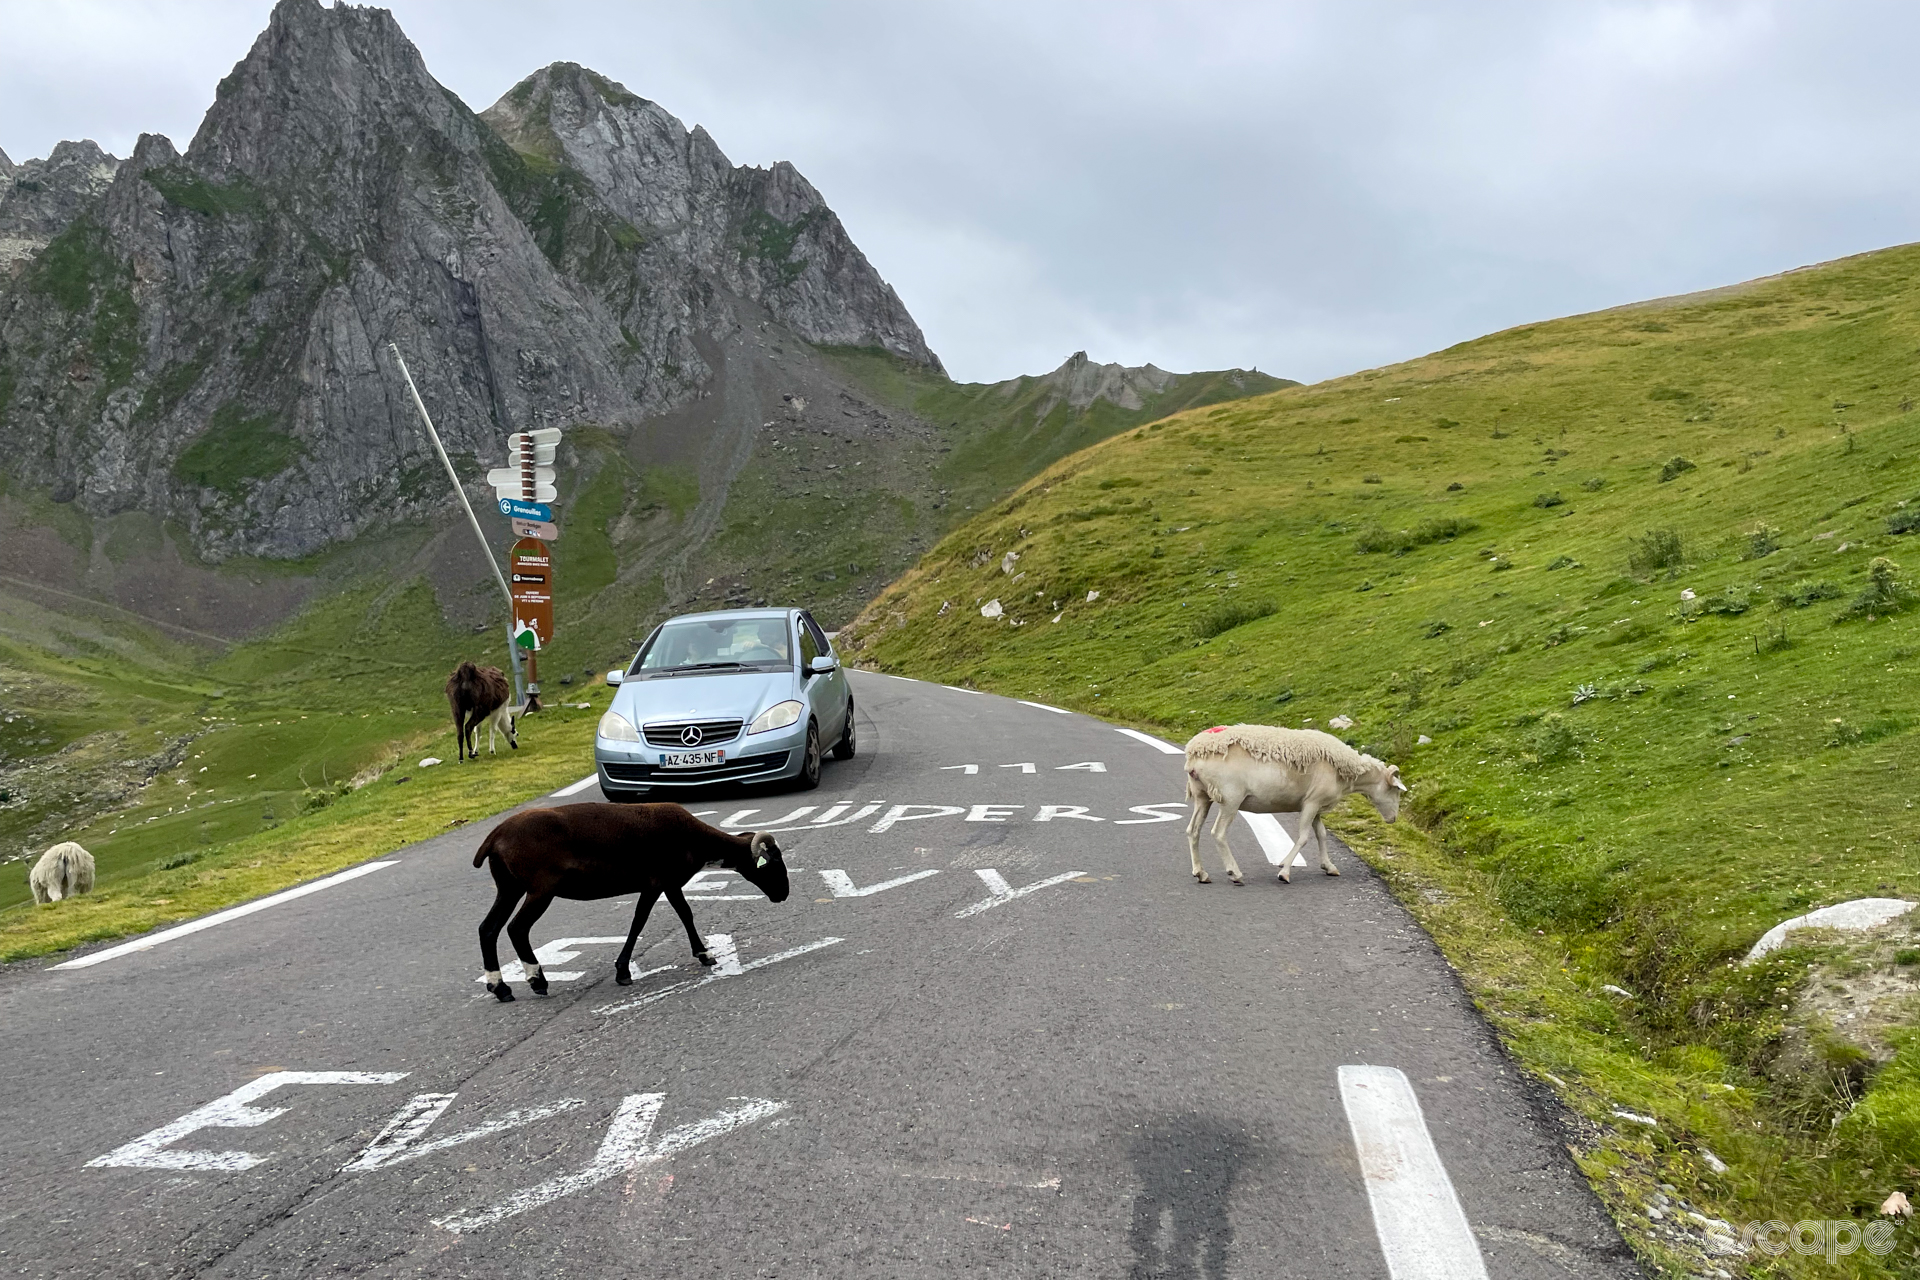 High on the Tourmalet climb, sheep amble across a narrow strip of pavement in front of a car. Behind, a peak looms amid green, grassy hills. Racer names are painted in block white letters on the road.